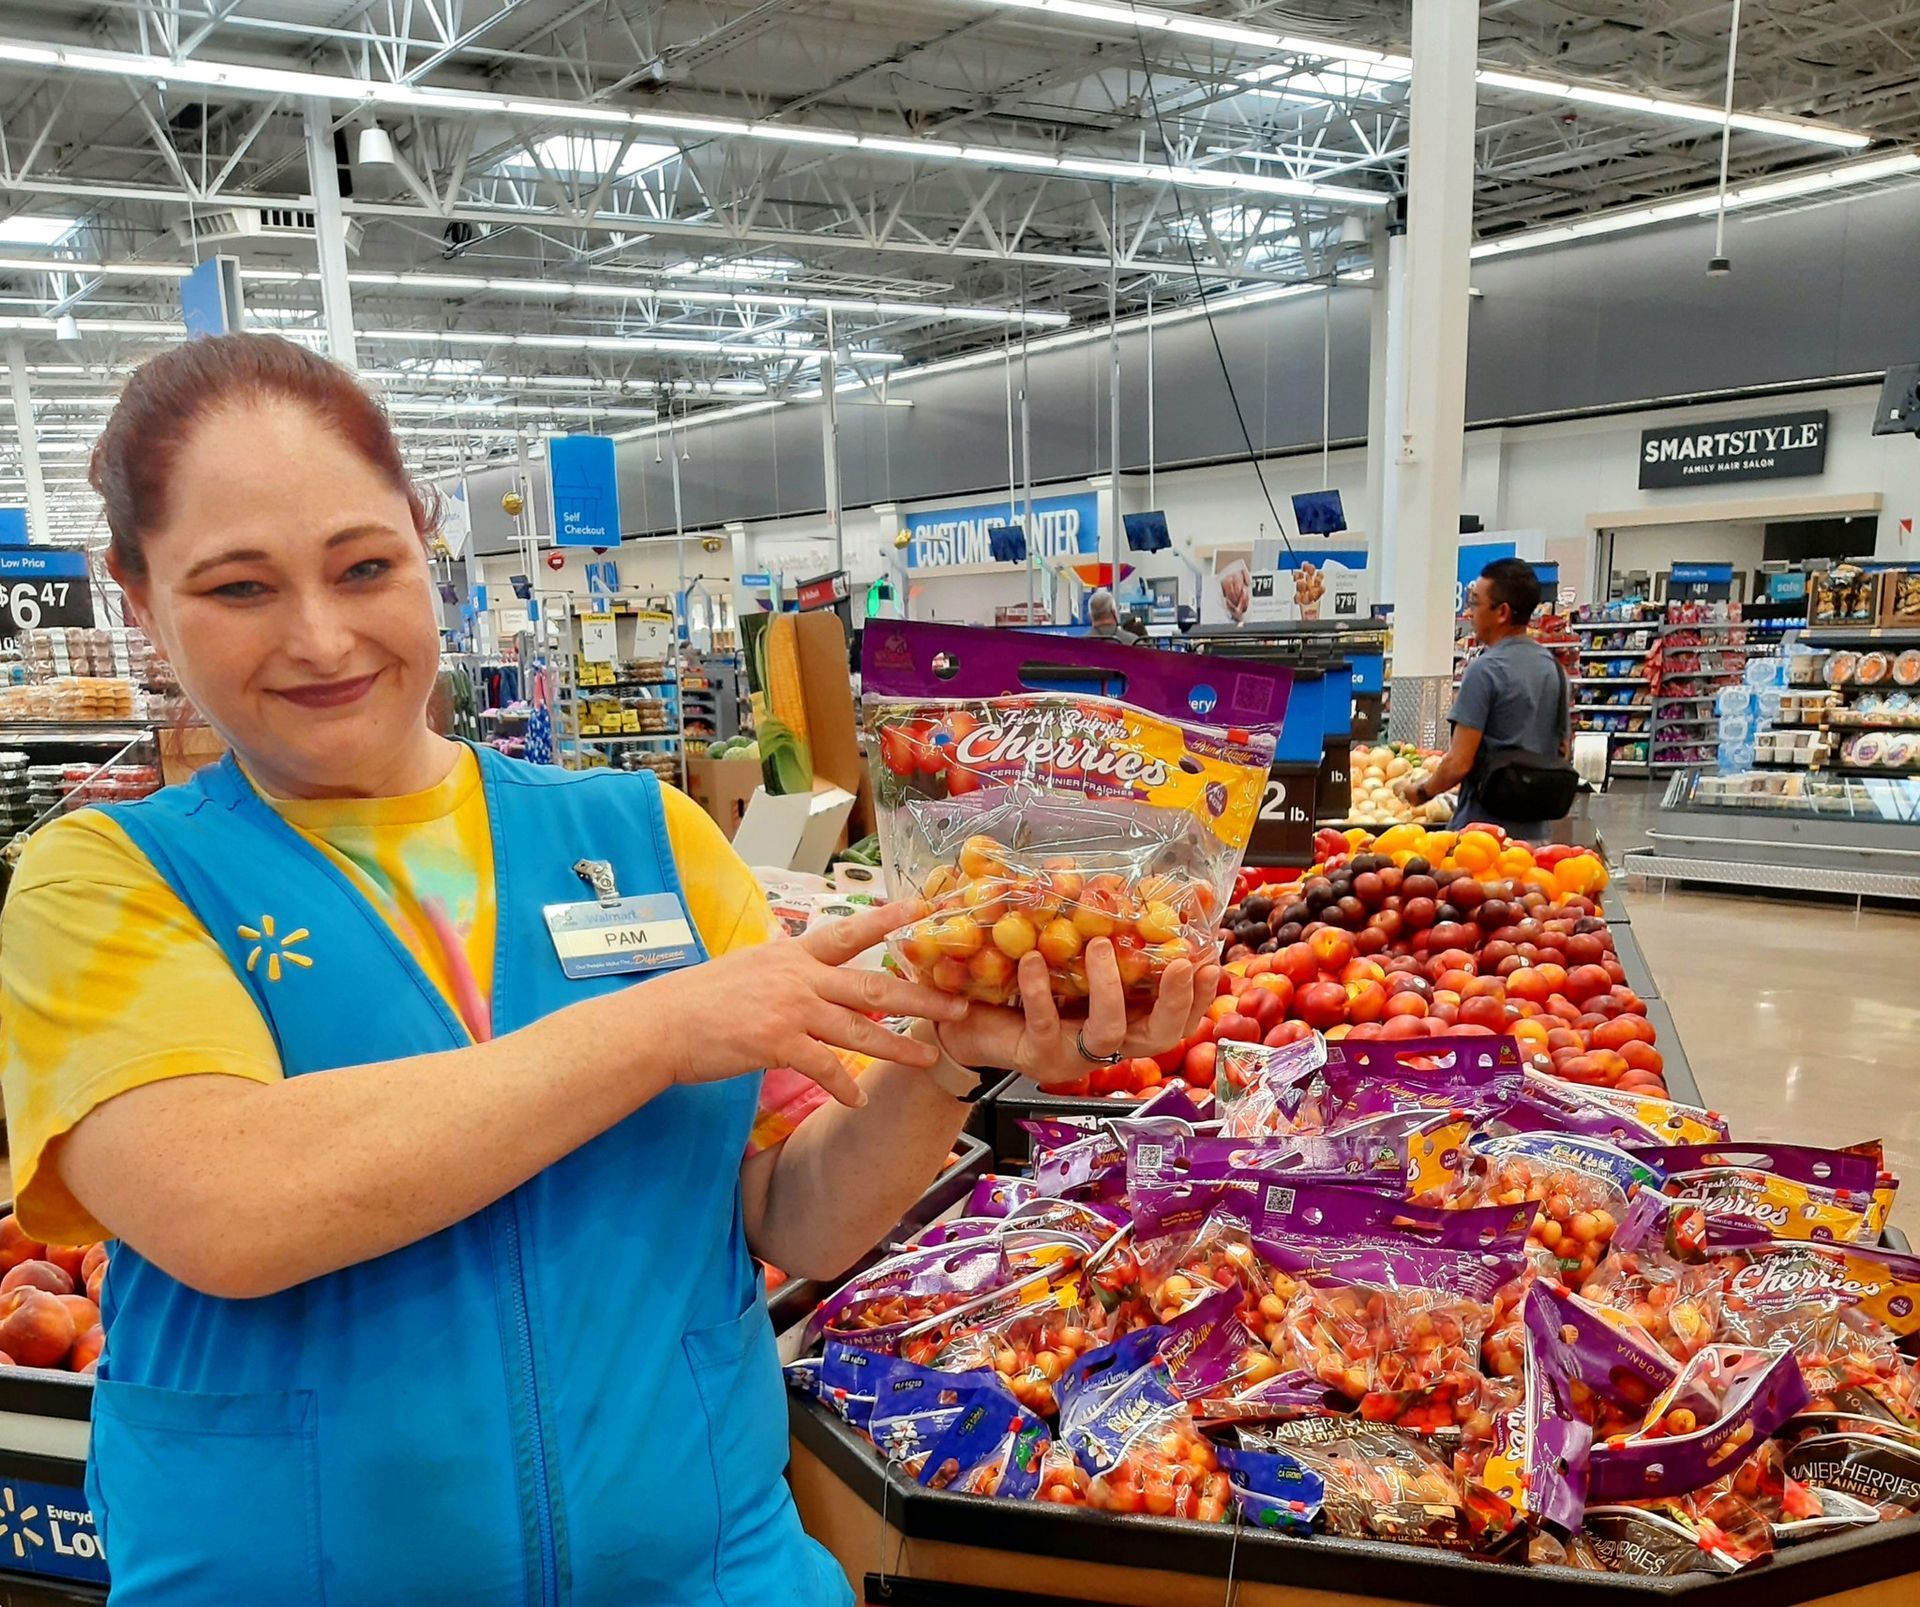 World's largest company by revenue: Walmart sets world record